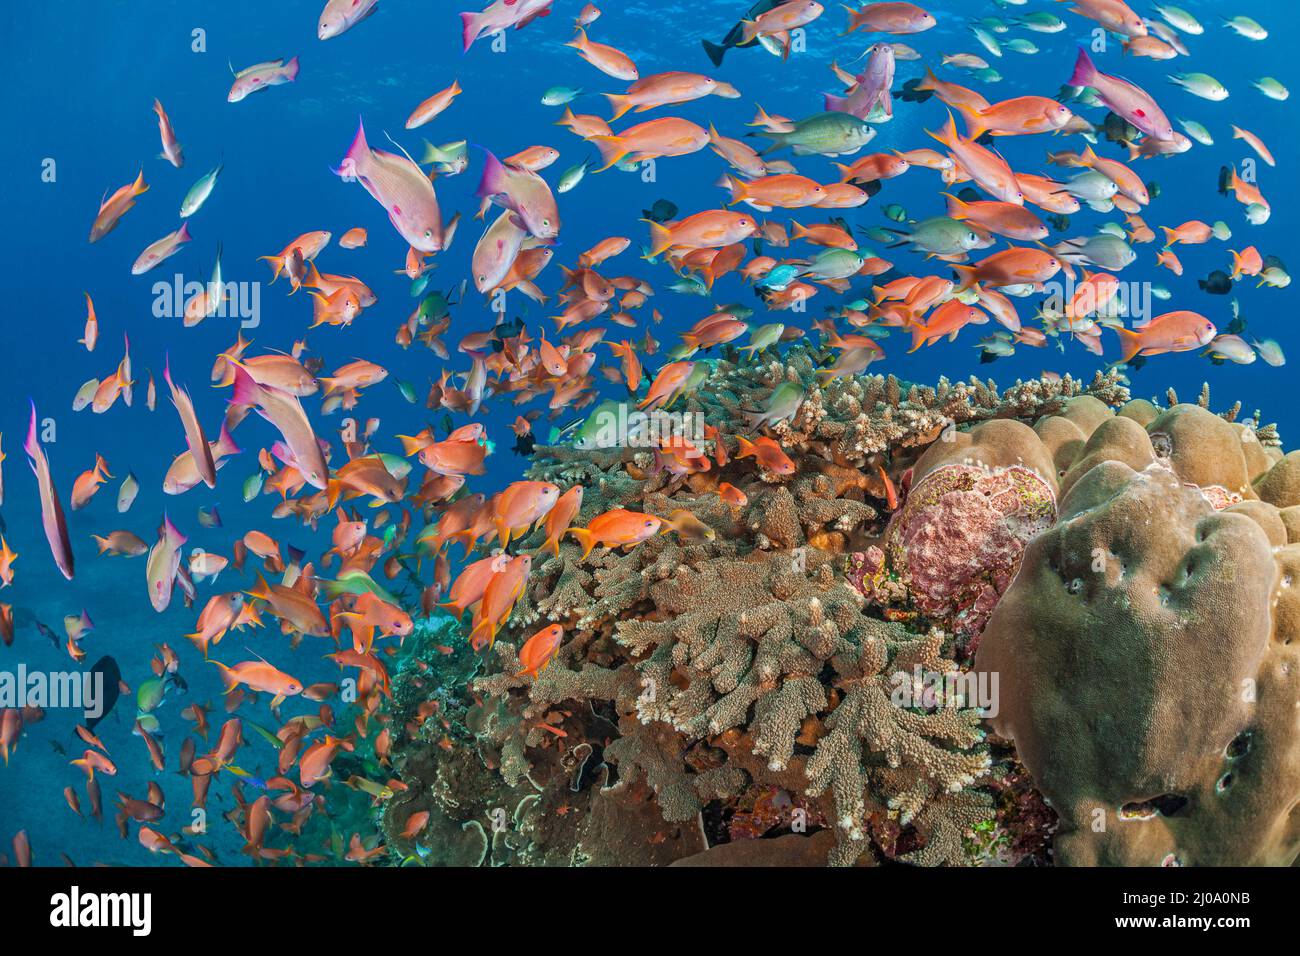 A hard coral reef along with schooling anthias and various reef fish, dominate this underwater scene, Crystal Bay, Nusa Penida, Bali Island, Indonesia Stock Photo